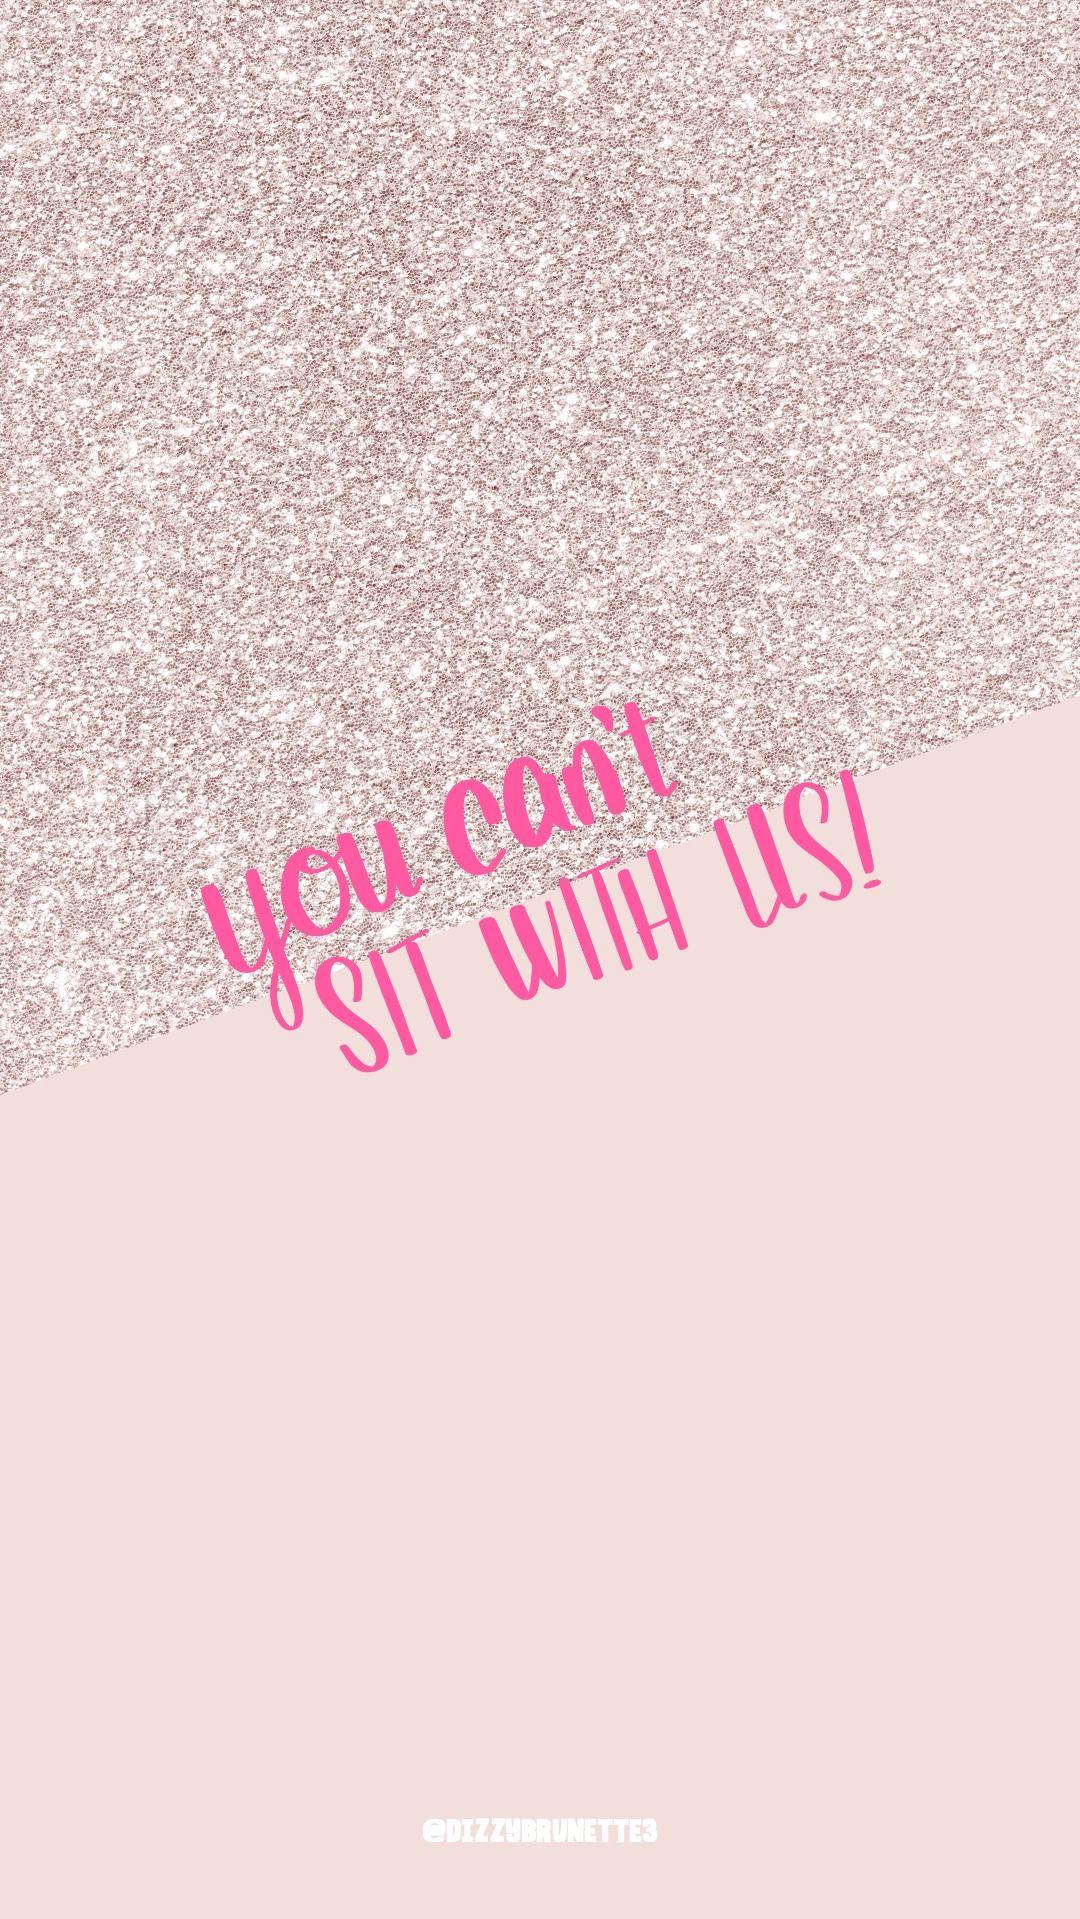 Mean Girls Day Wallpaper Quote